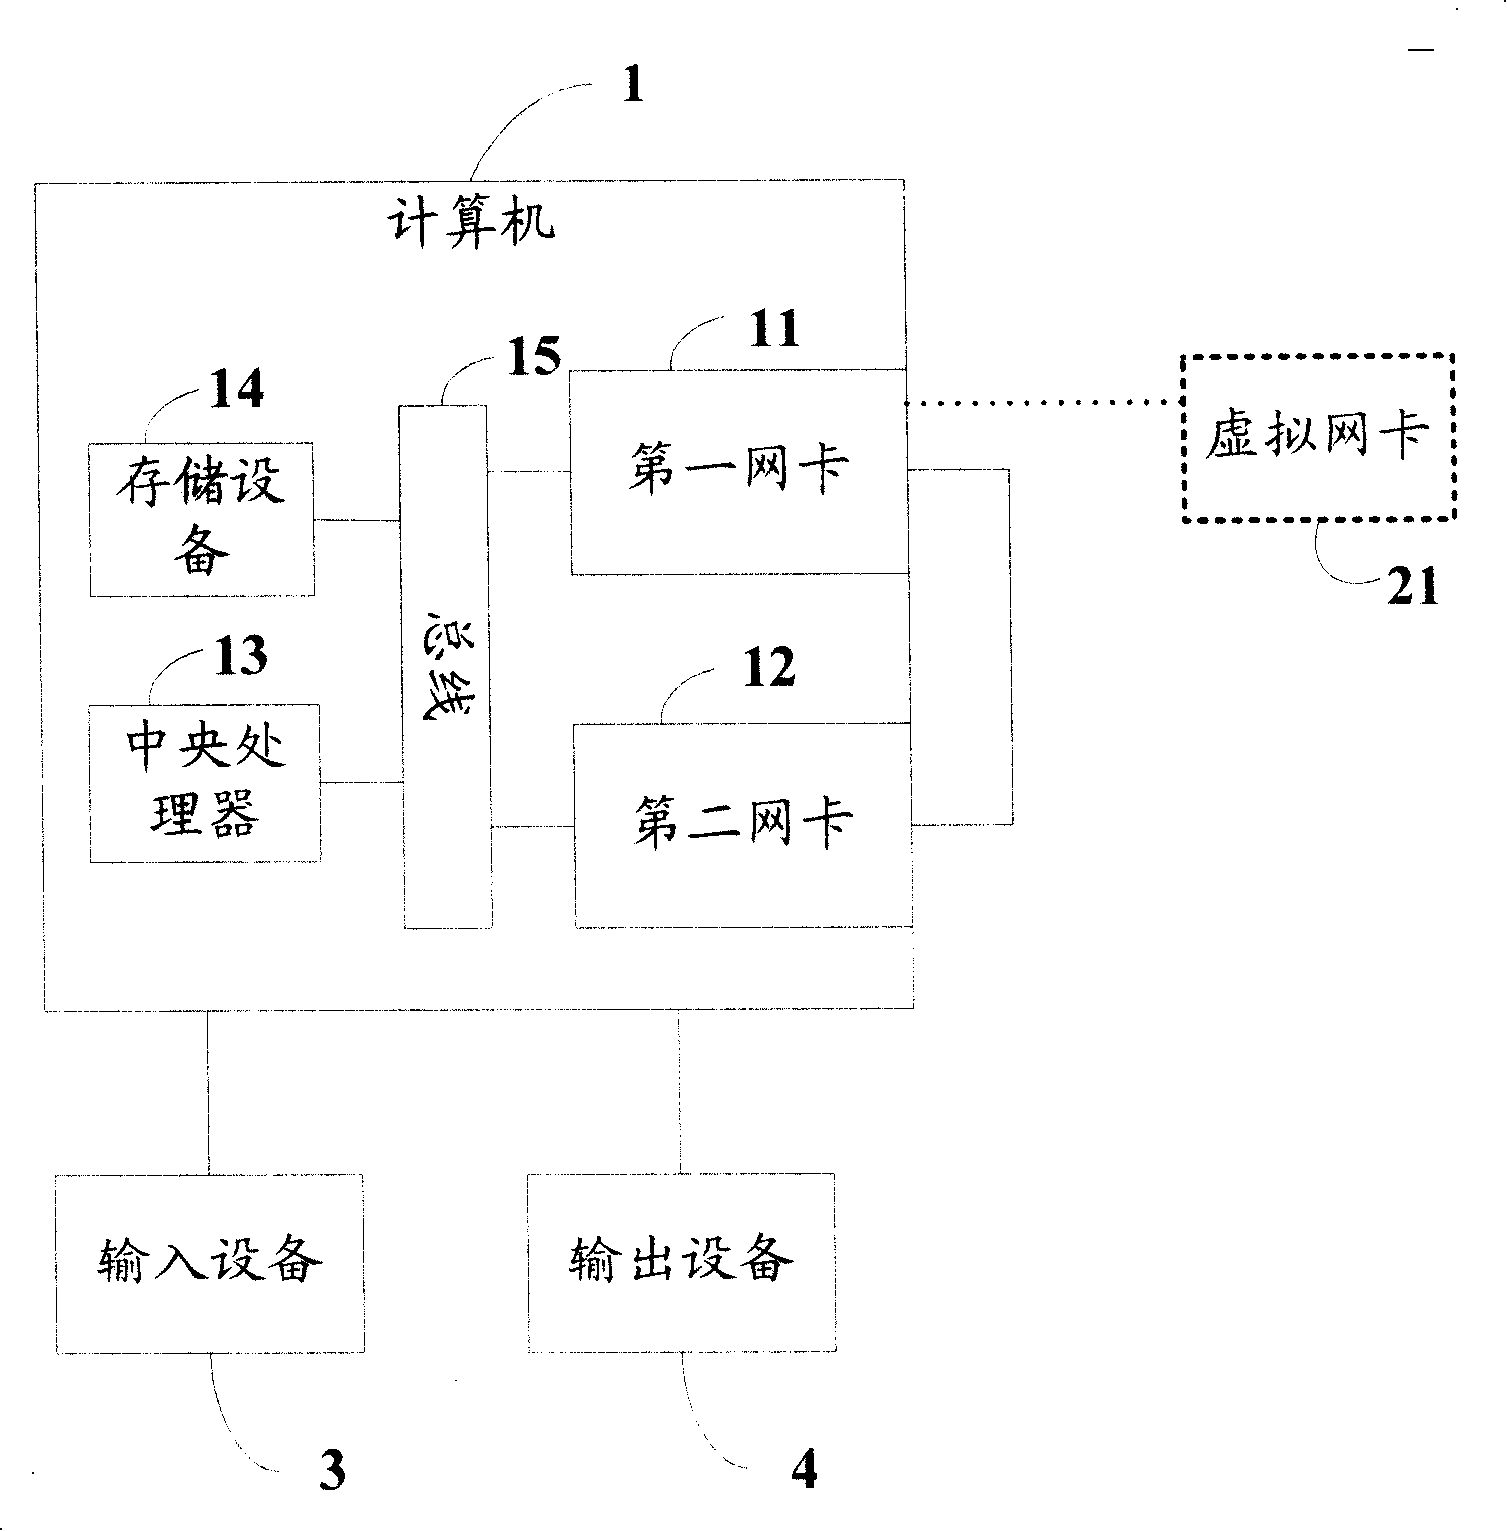 Network card transmission speed testing system and method